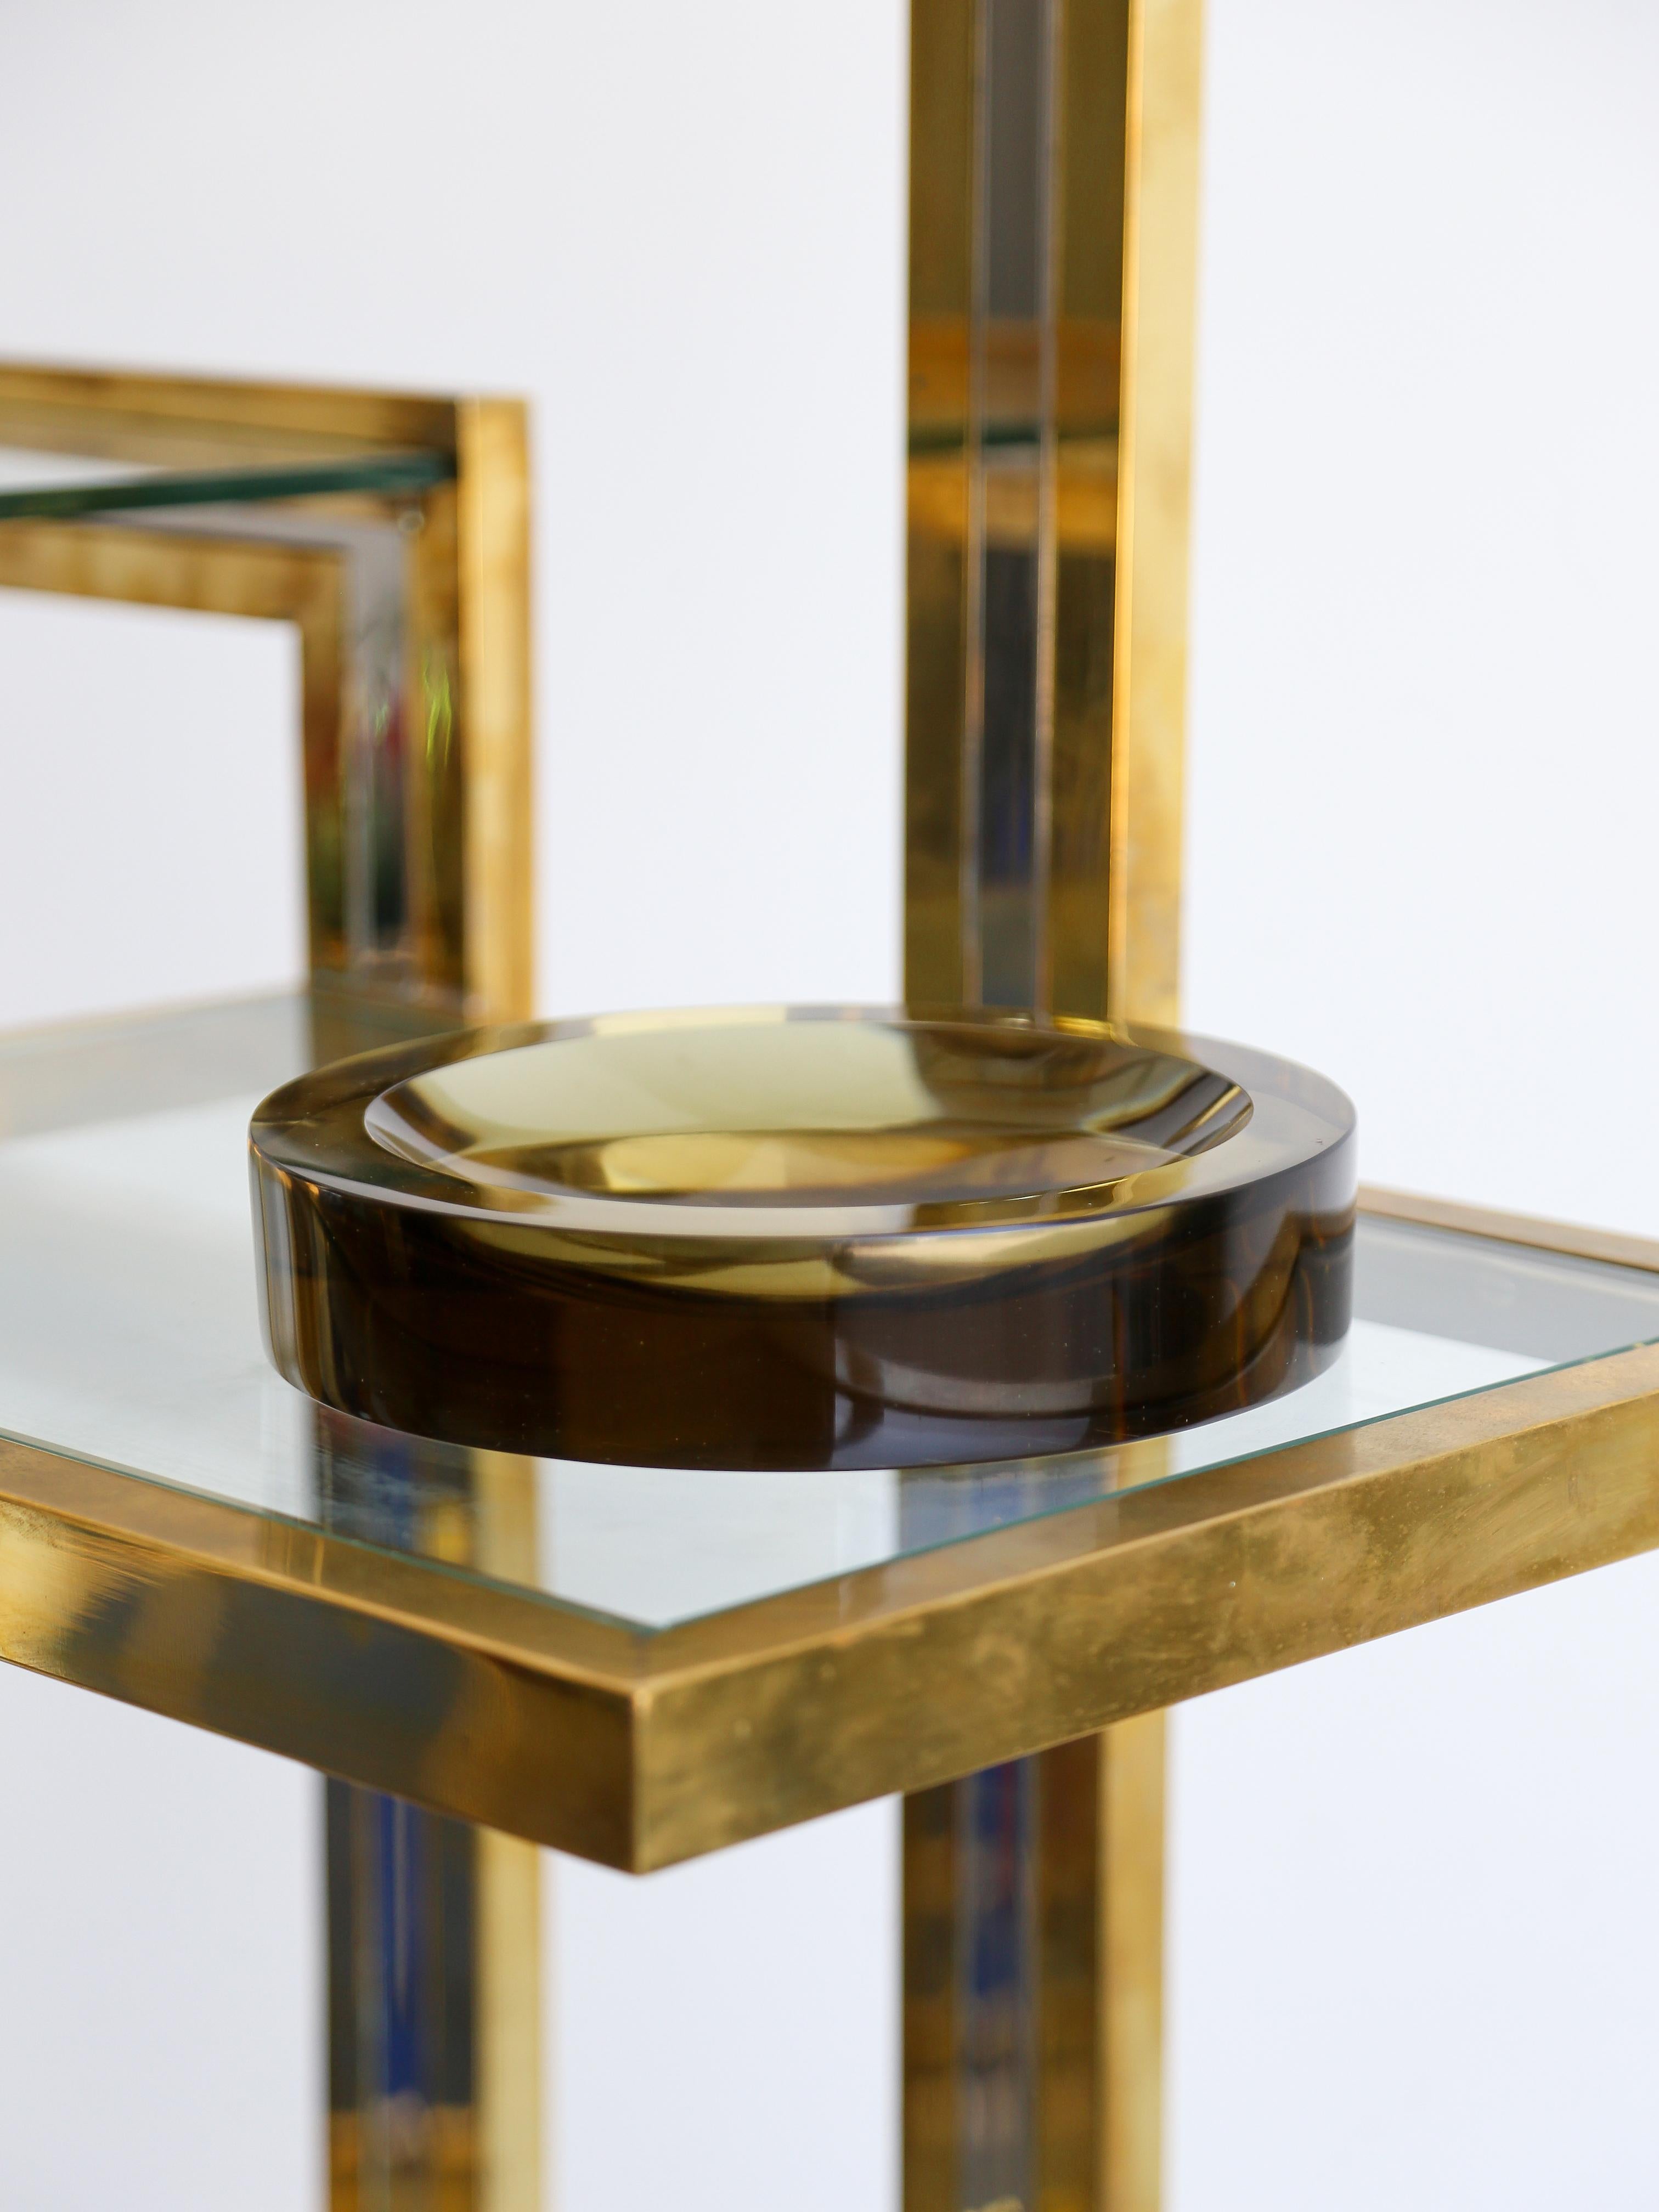 Hand-Crafted Round Murano Sommerso Smoked Glass Ashtrays by V. Nason & Carlo for Mazzega